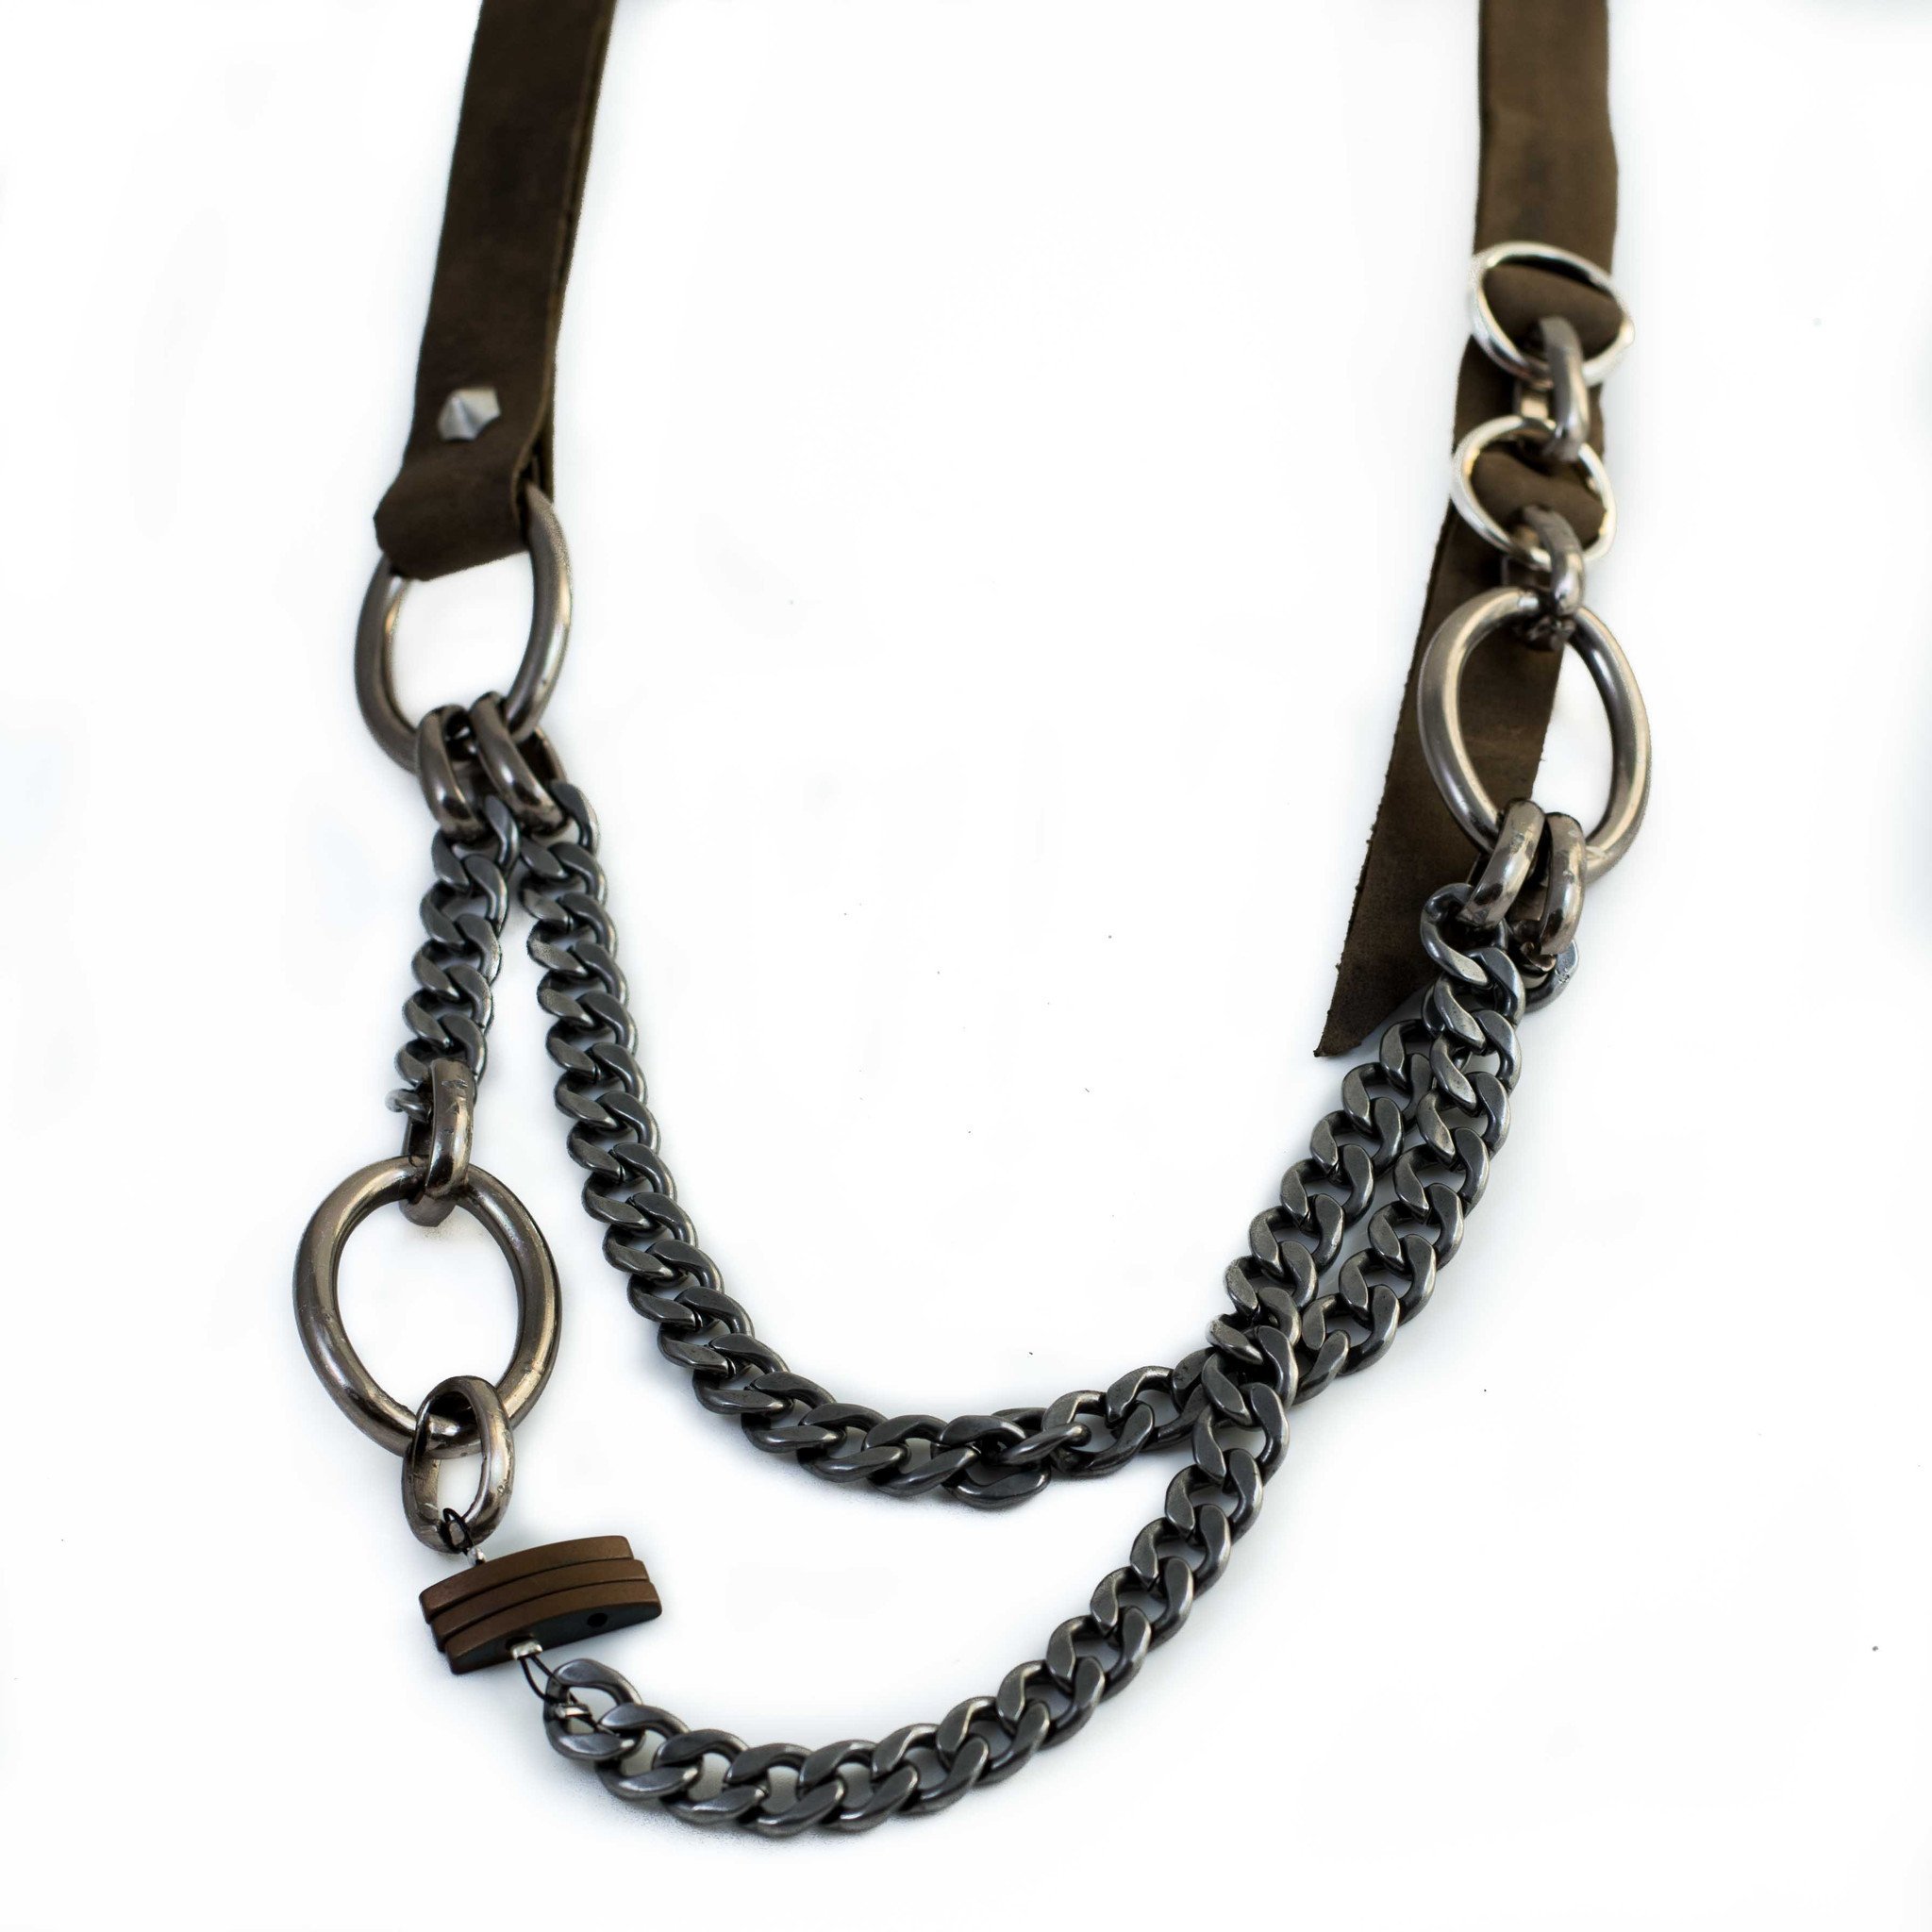 Necklace with Khaki-beige rough leather and iron chains (NC-1028)